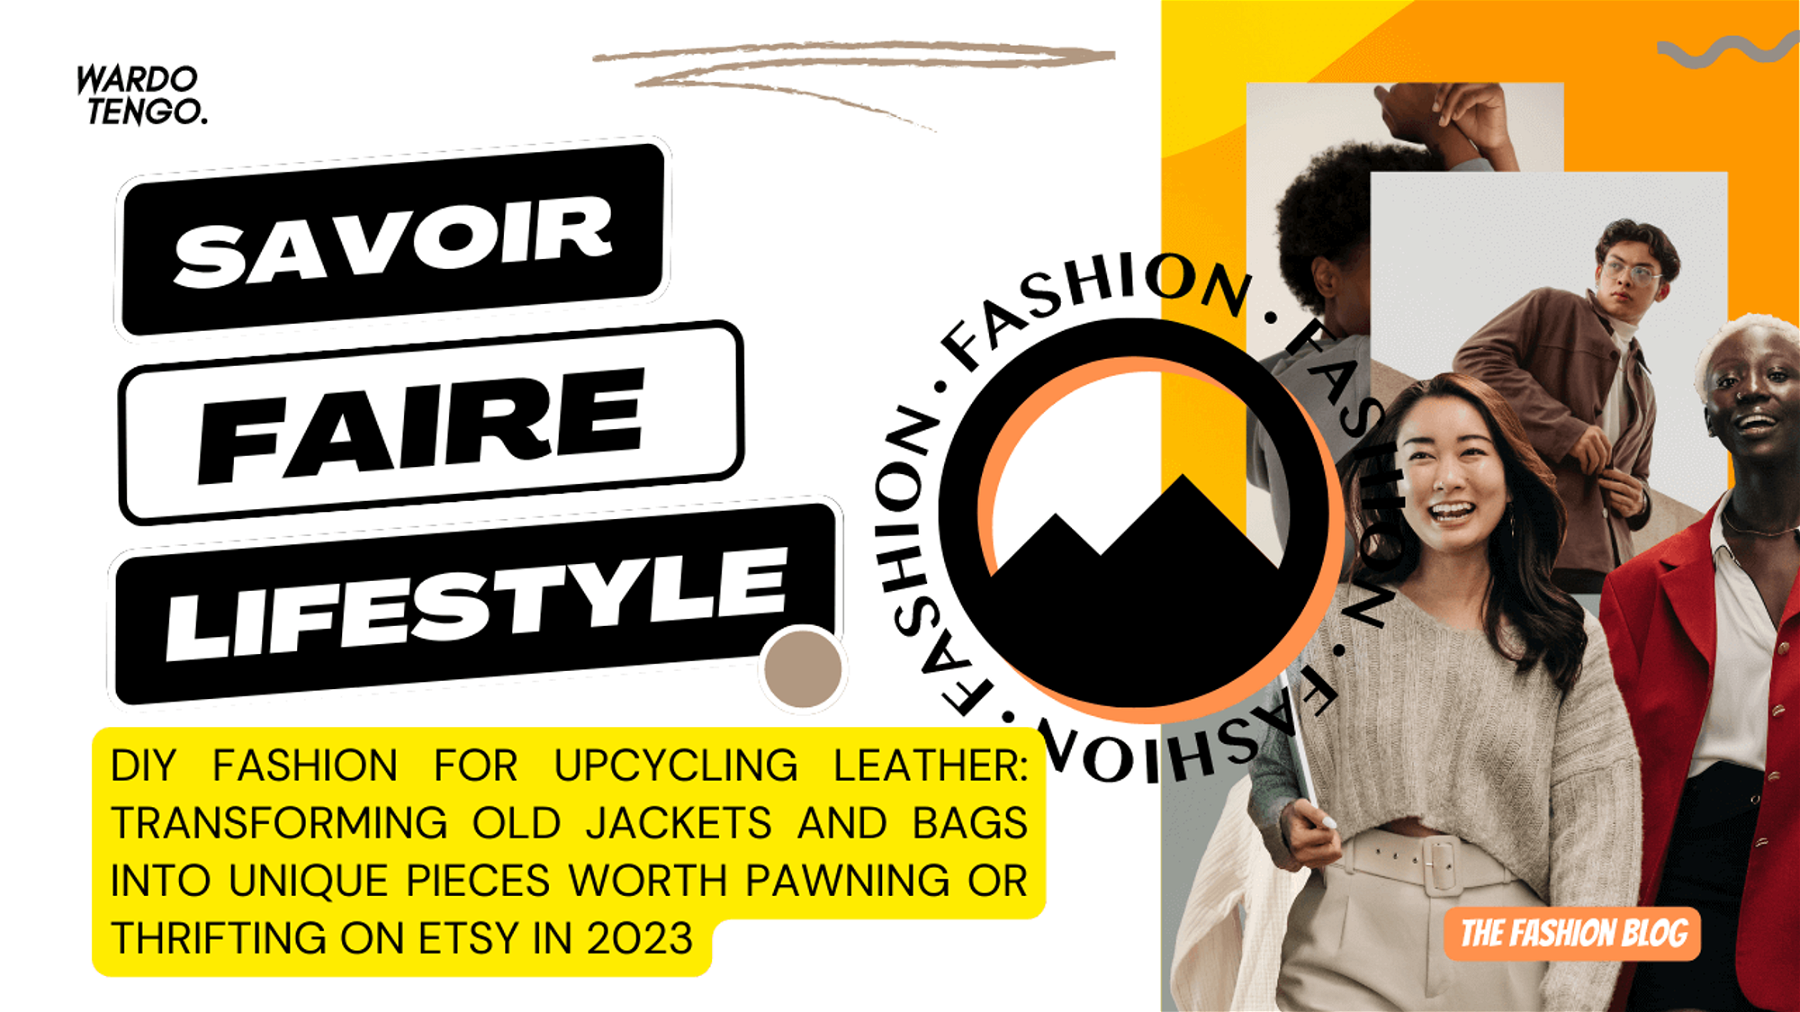 DIY Fashion for Upcycling Leather: Transforming Old Jackets and Bags into Unique Pieces Worth Pawning or Thrifting on Etsy in 2023